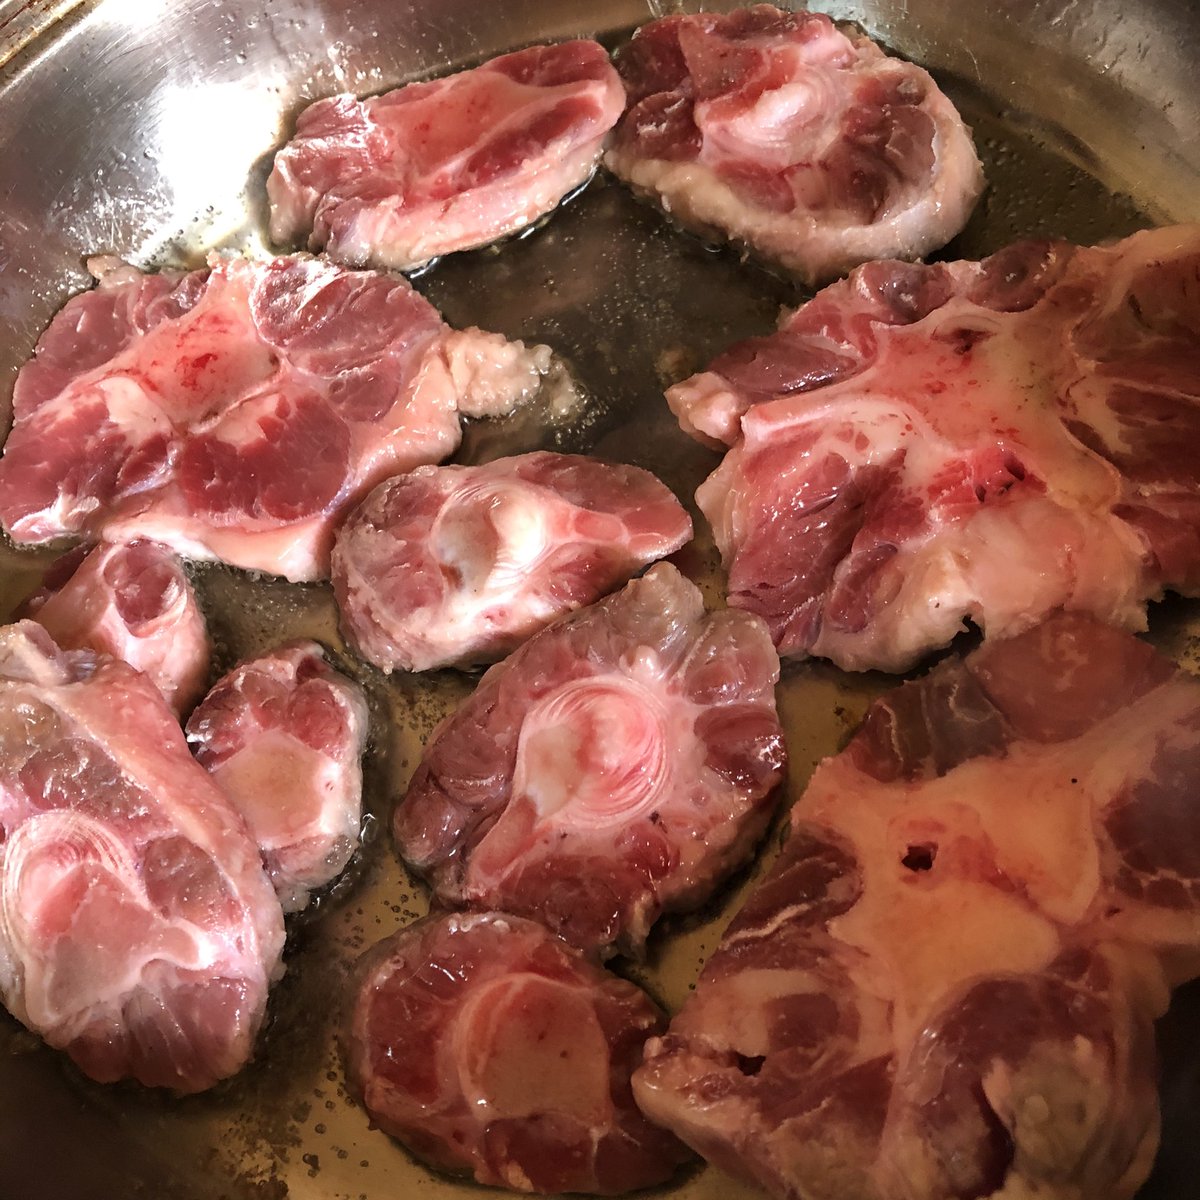 Browning my oxtail